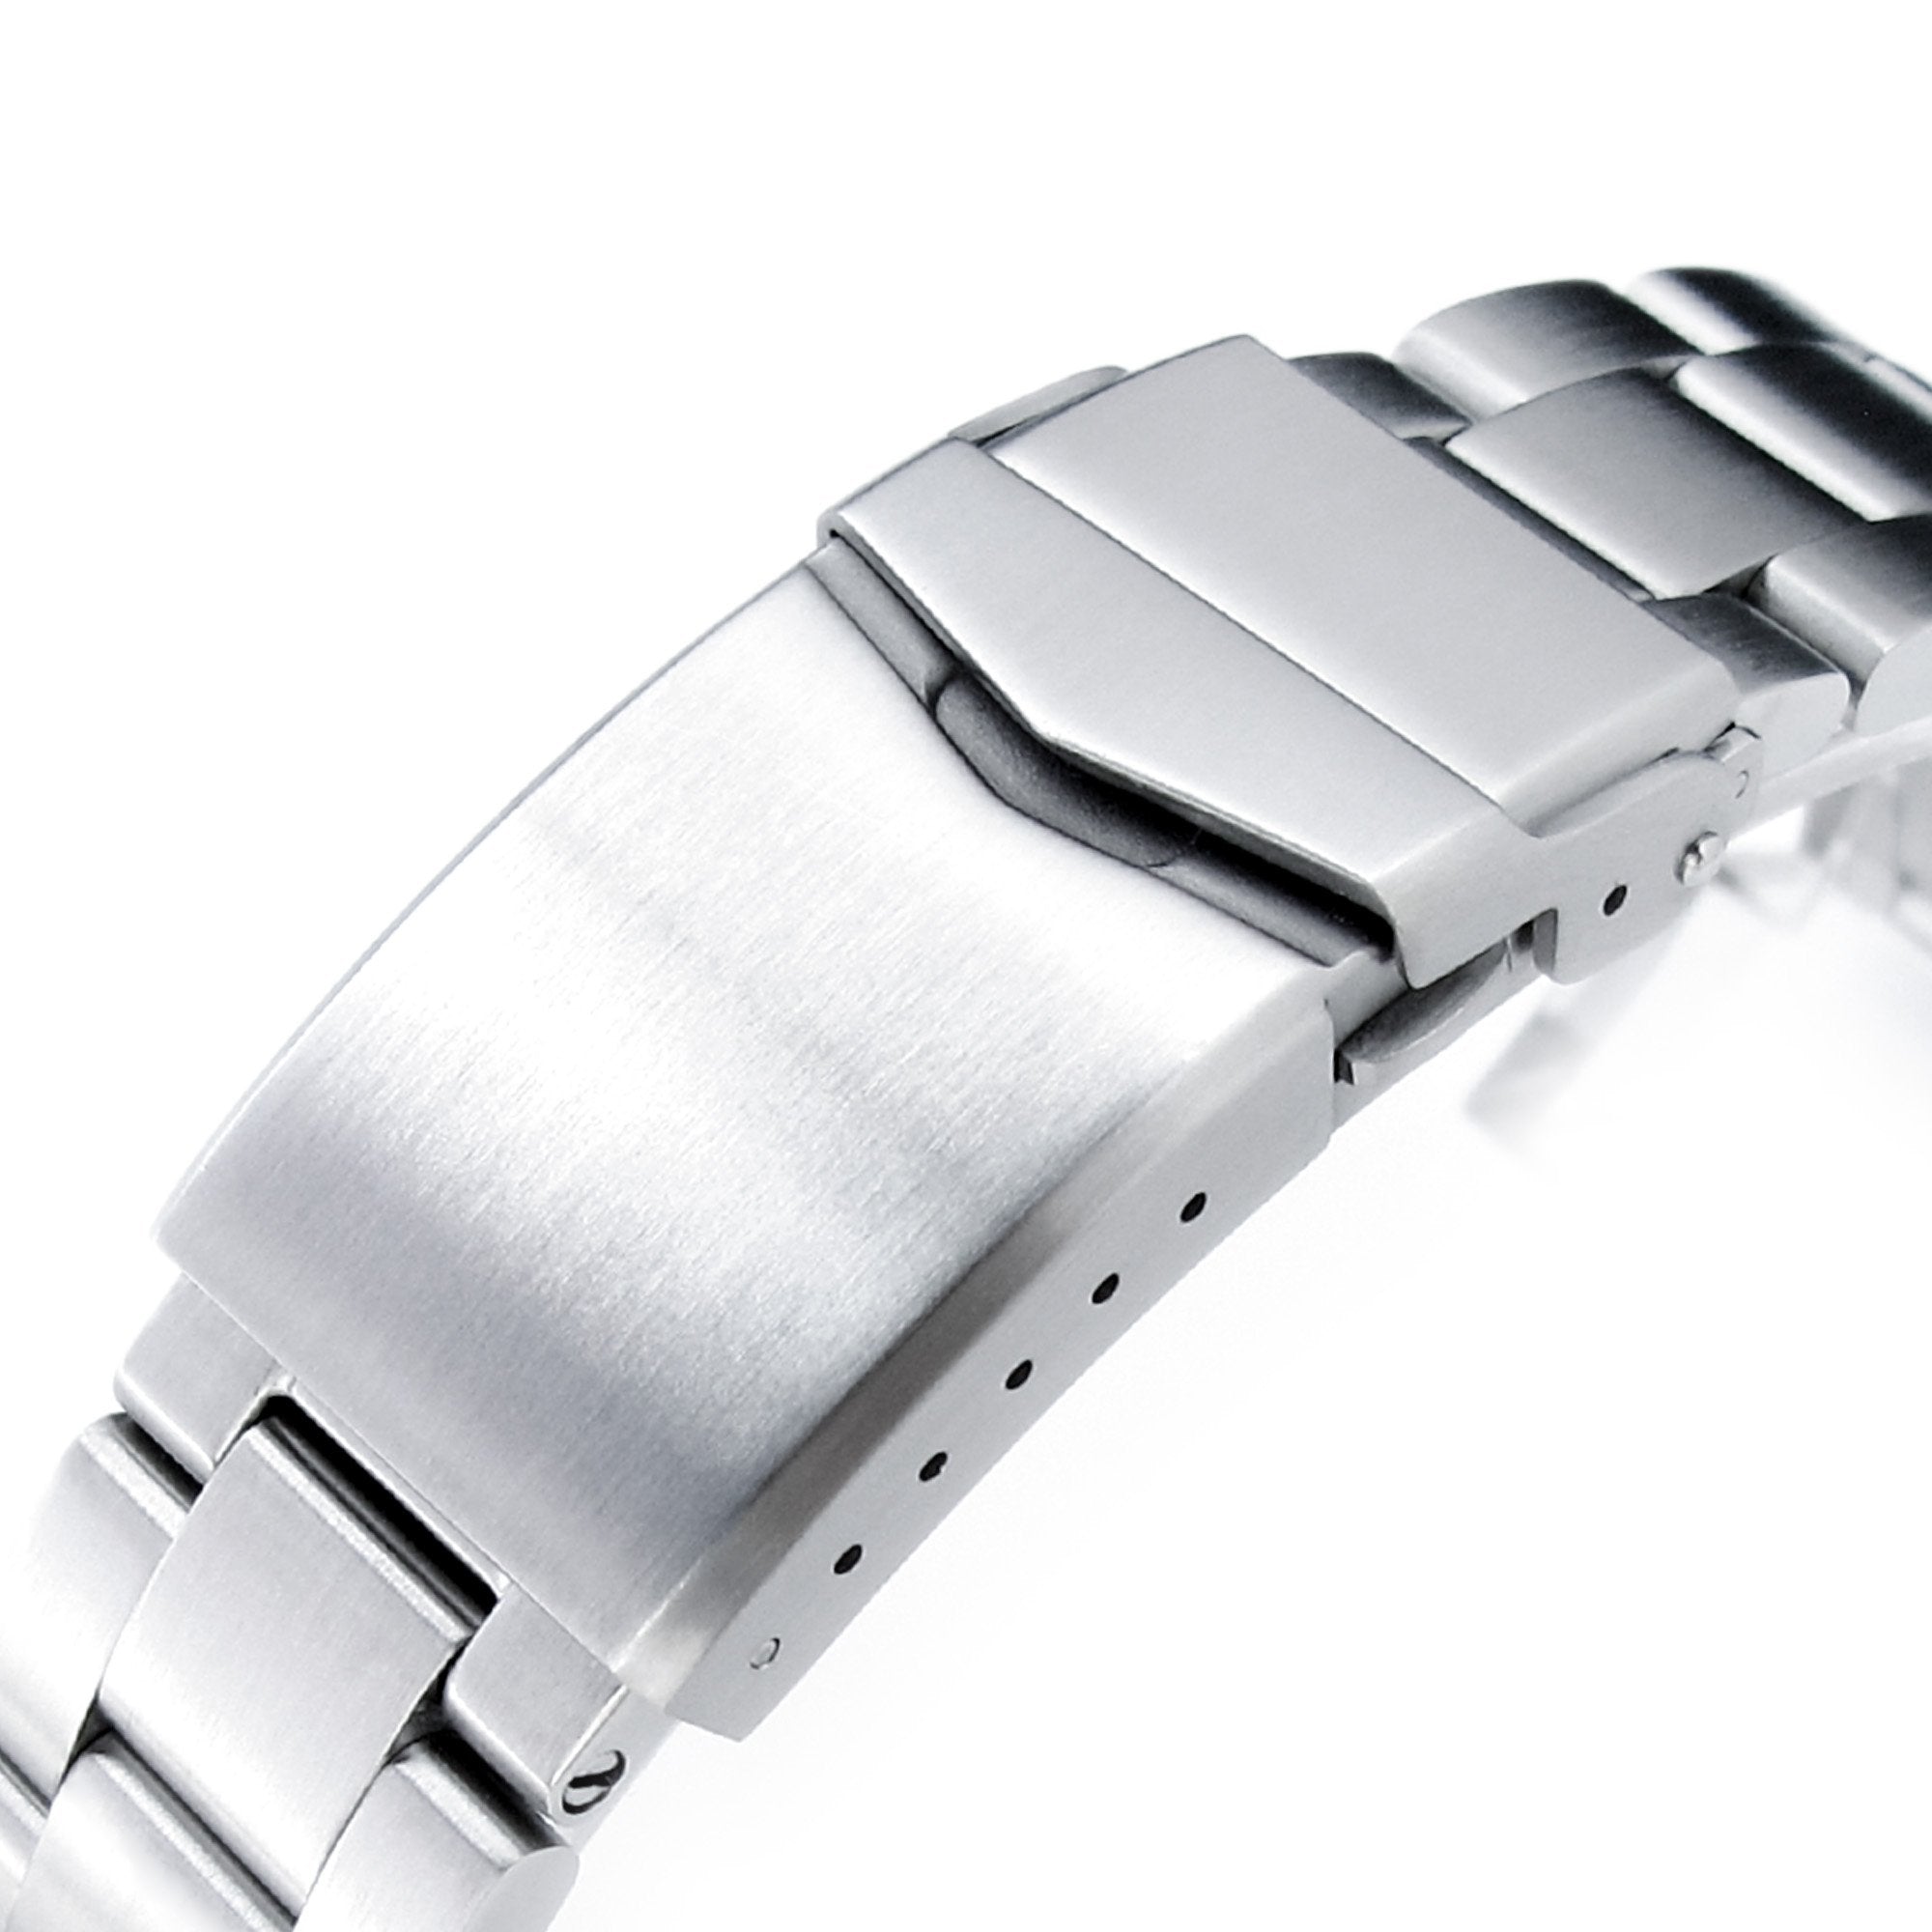 22mm Super-O Boyer 316L Stainless Steel Watch Bracelet for Seiko 6309-7040 Brushed V-Clasp Strapcode Watch Bands